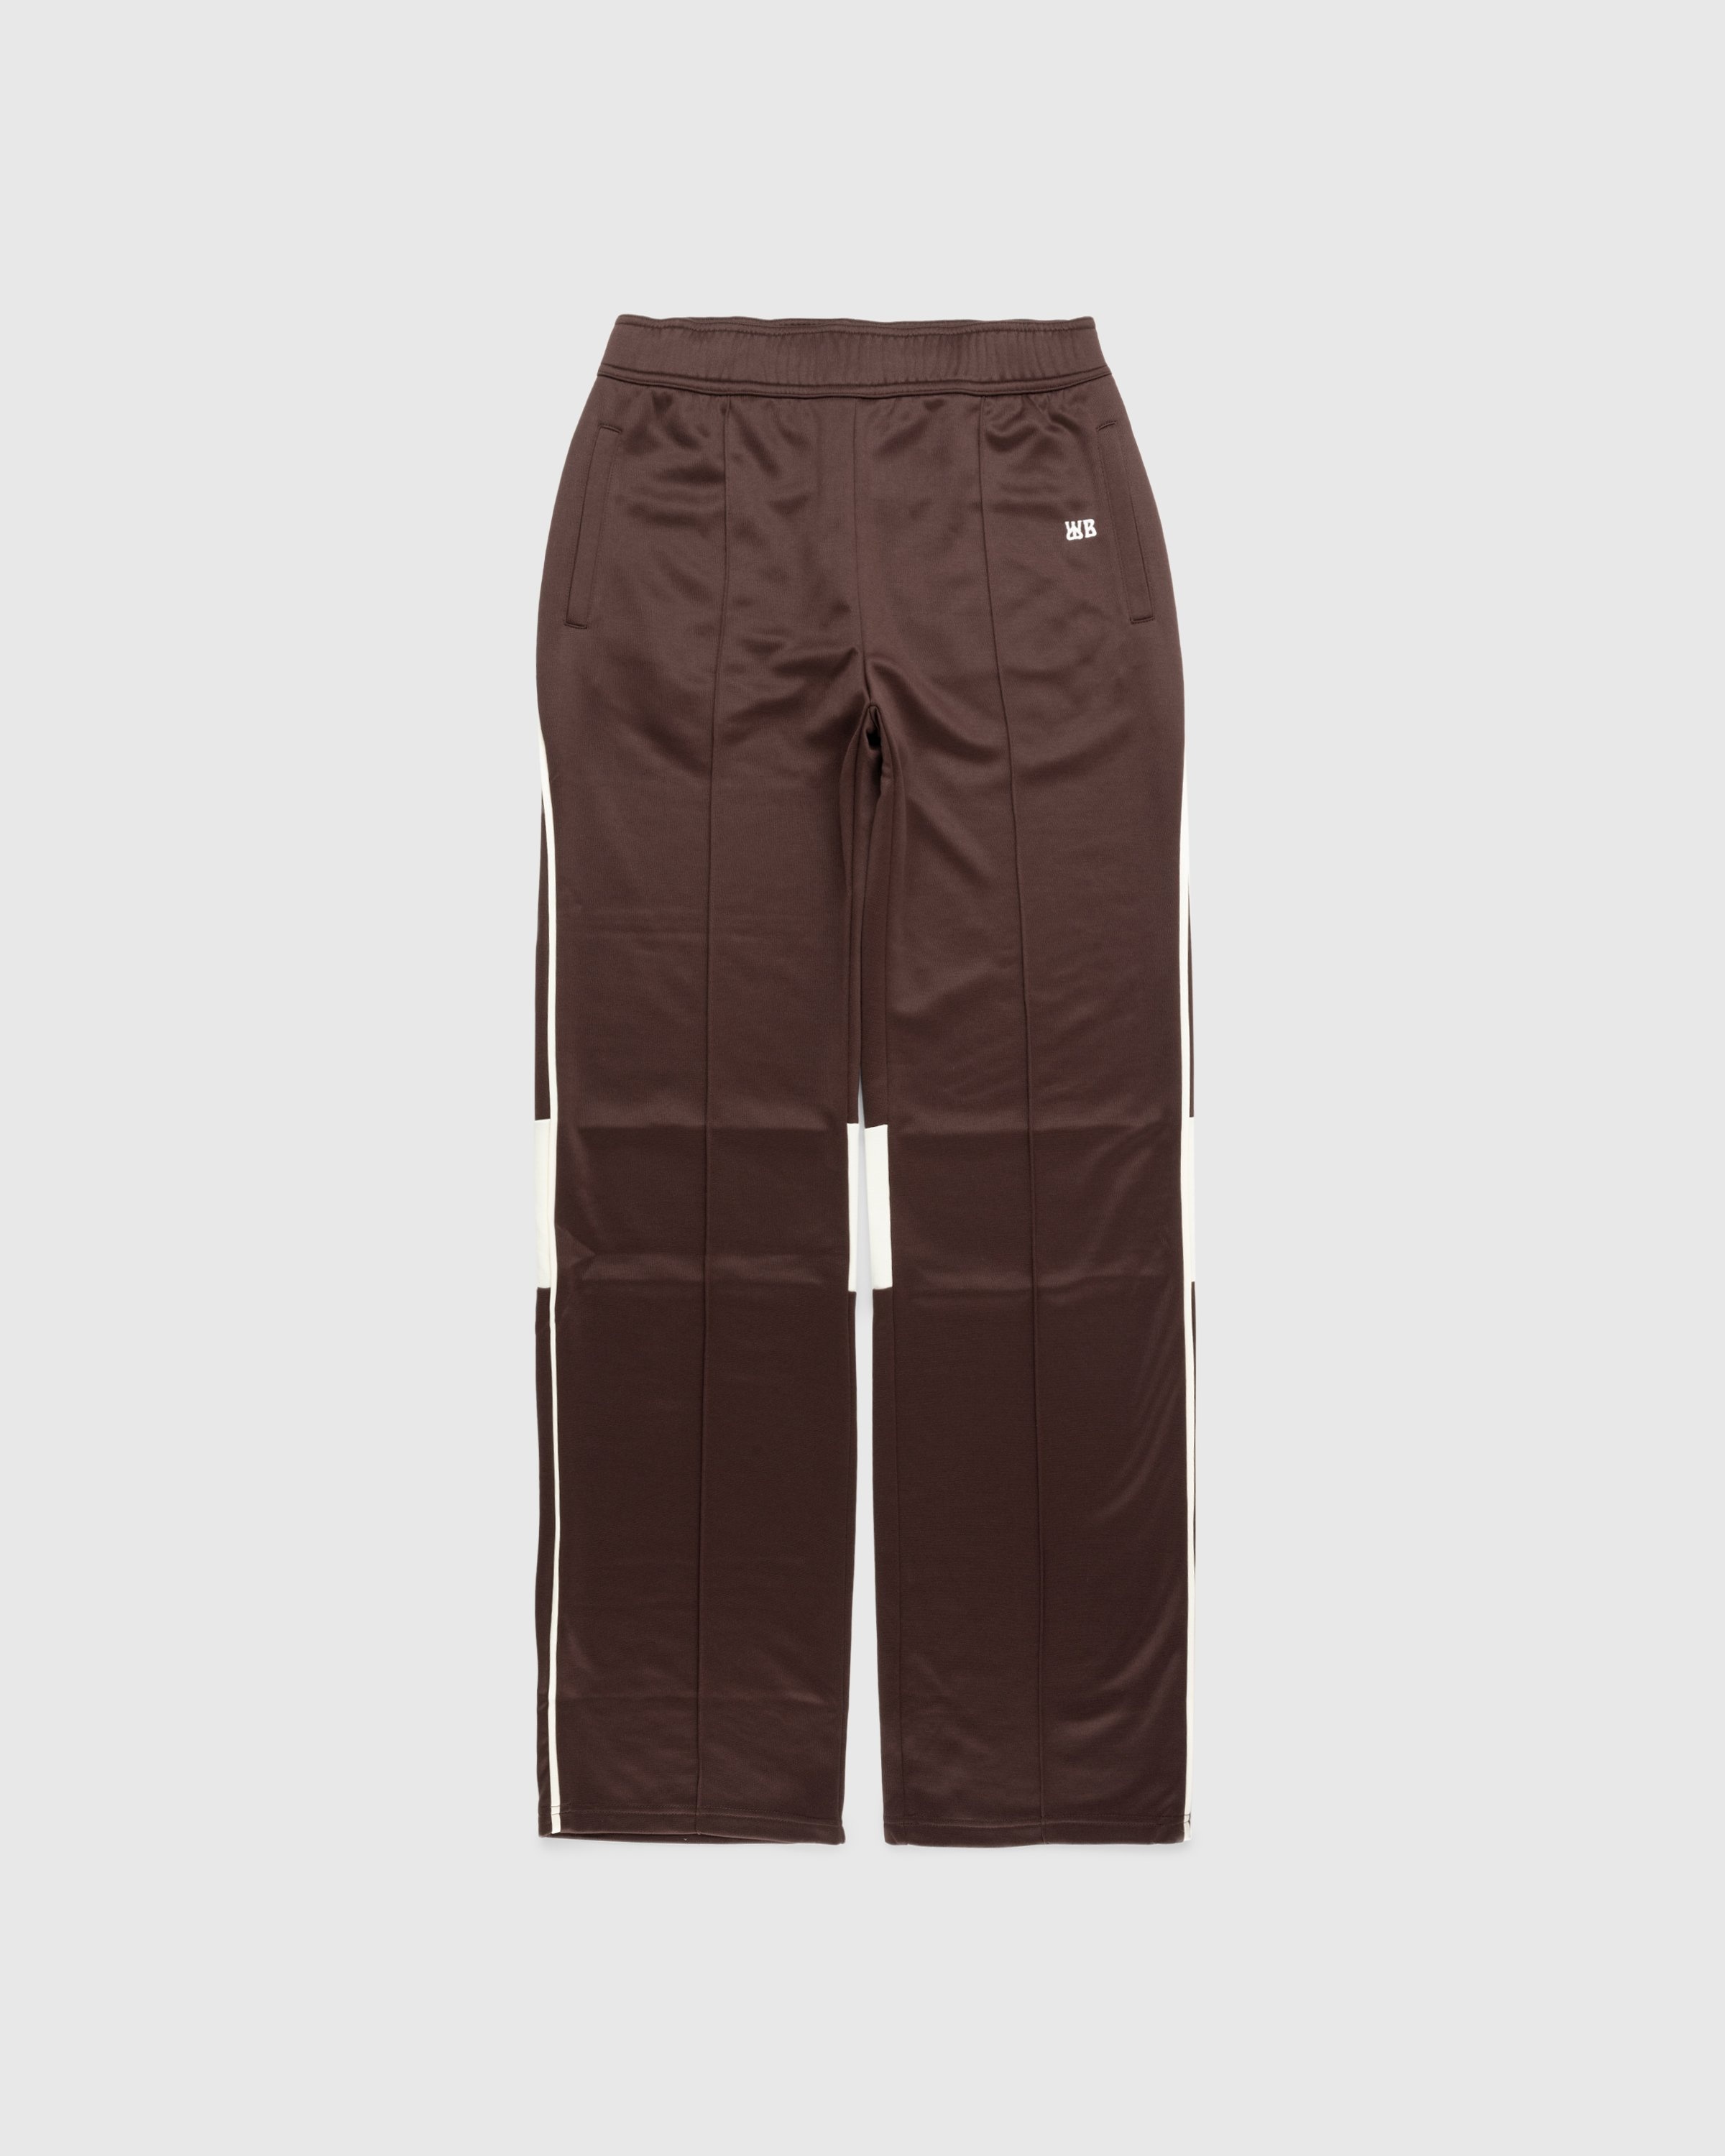 Buy Brown Organic Cotton Pants for Men Online in India at SELECTED